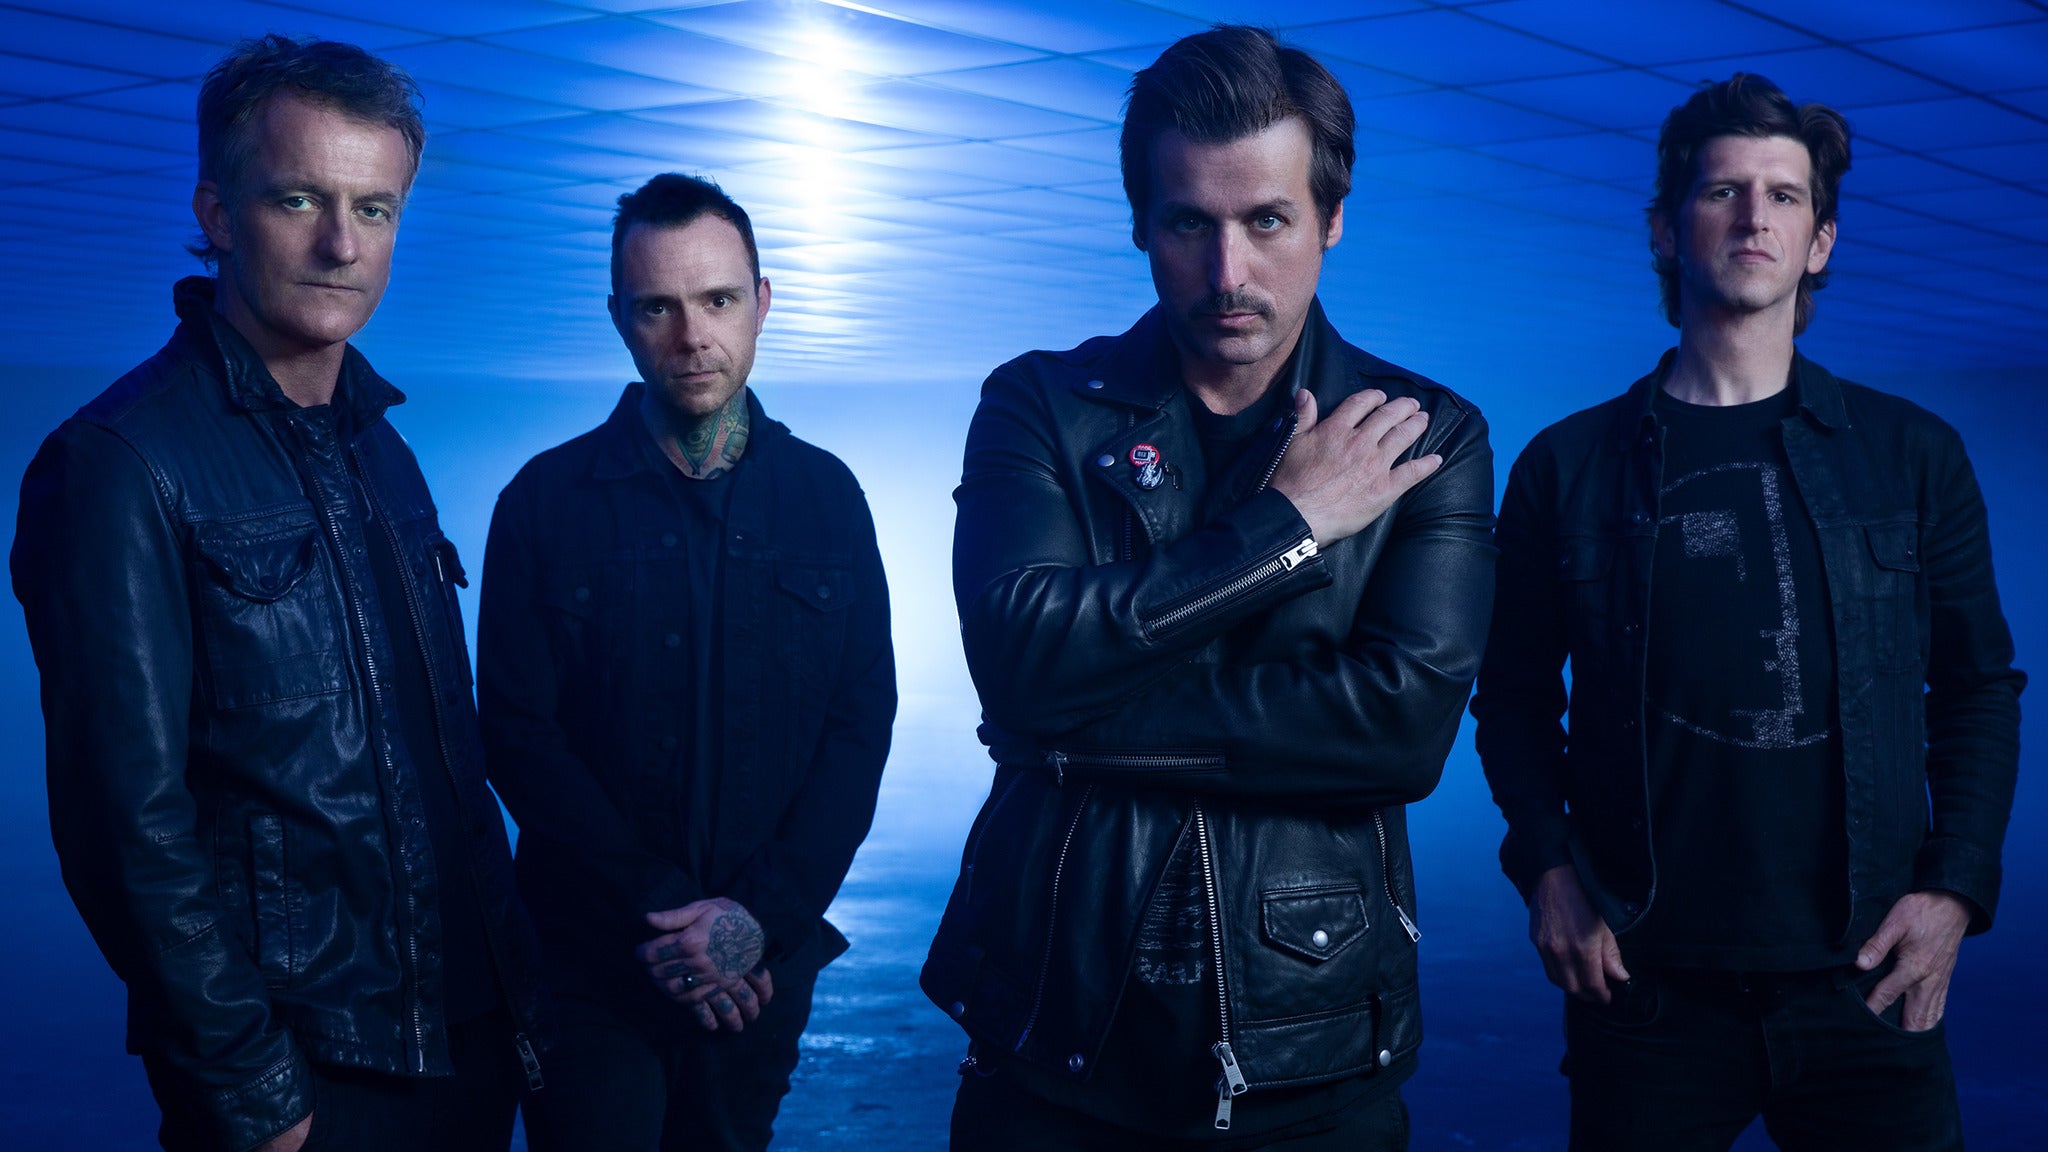 Our Lady Peace - The Wonderful Future Tour in London promo photo for Spotify presale offer code